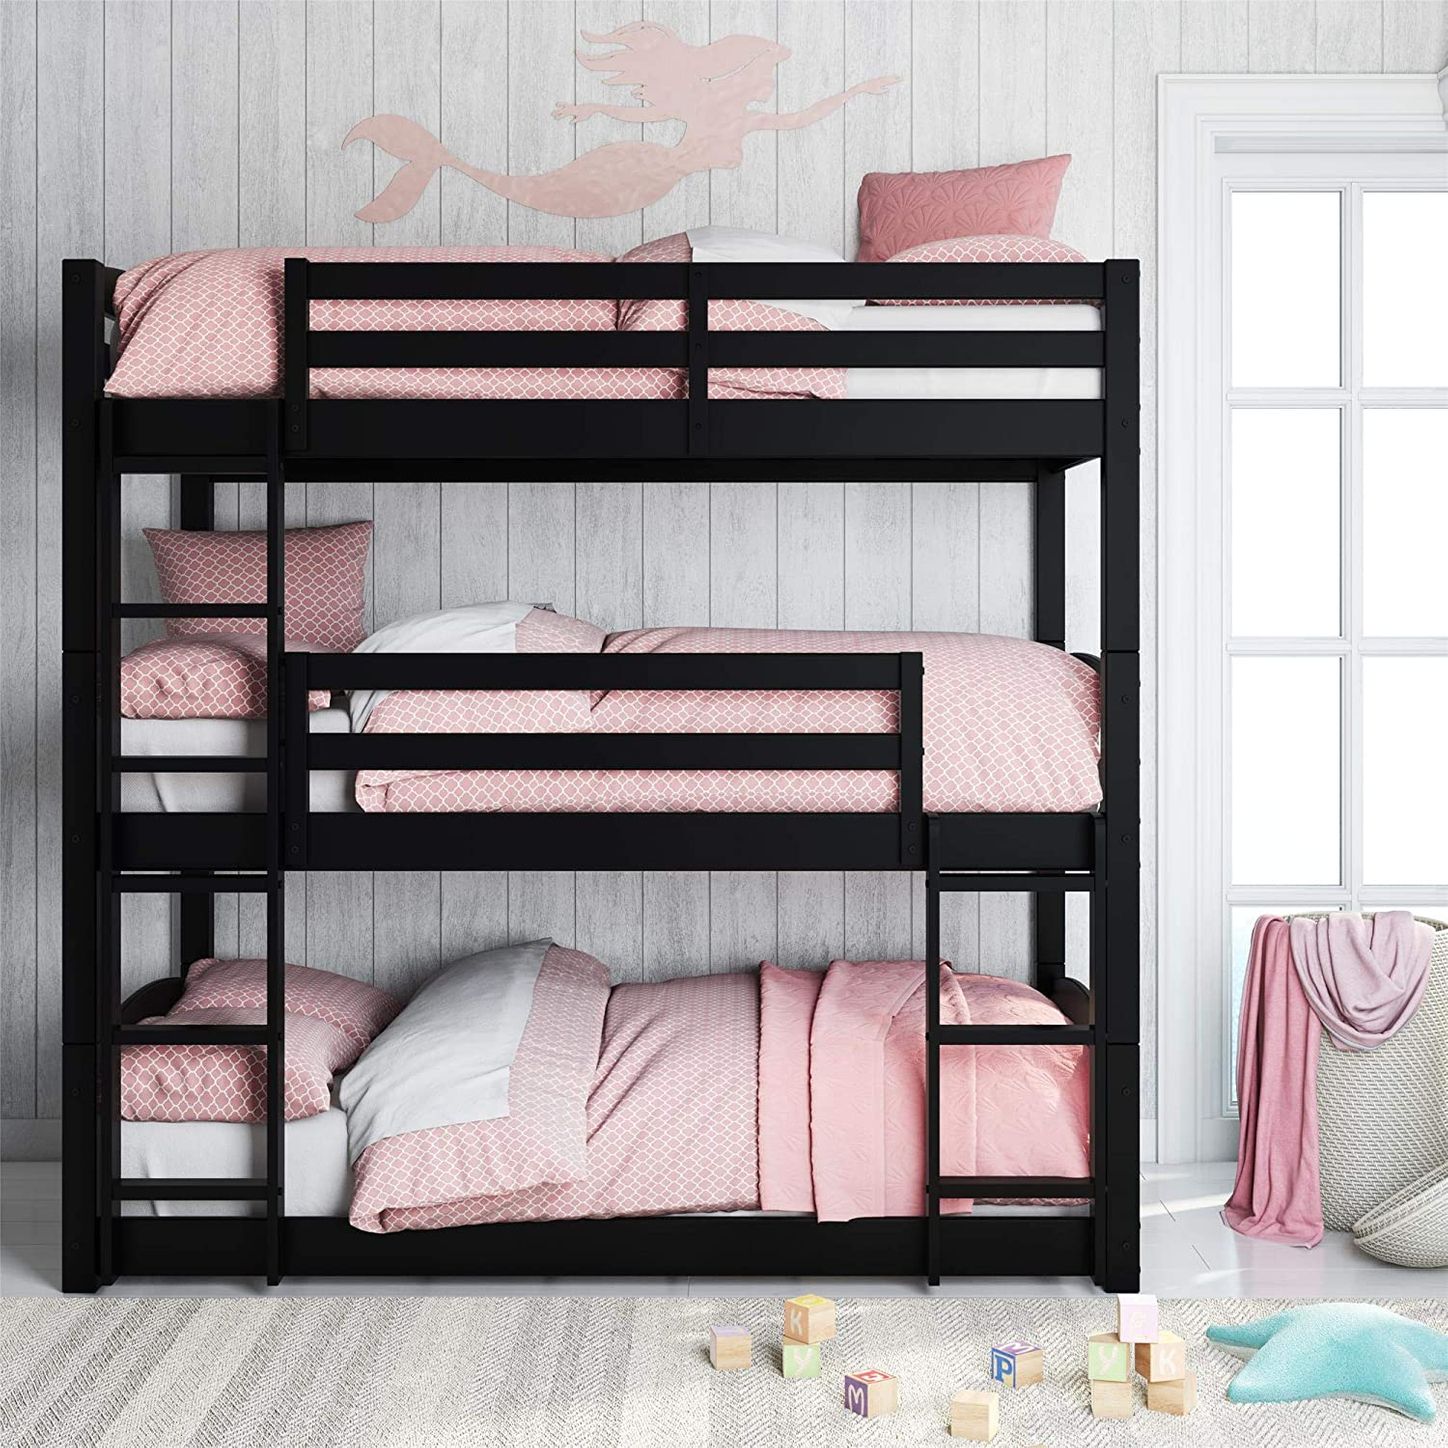 8 Best Bunk Beds 2020 The Strategist, Bunk Beds That Come Apart